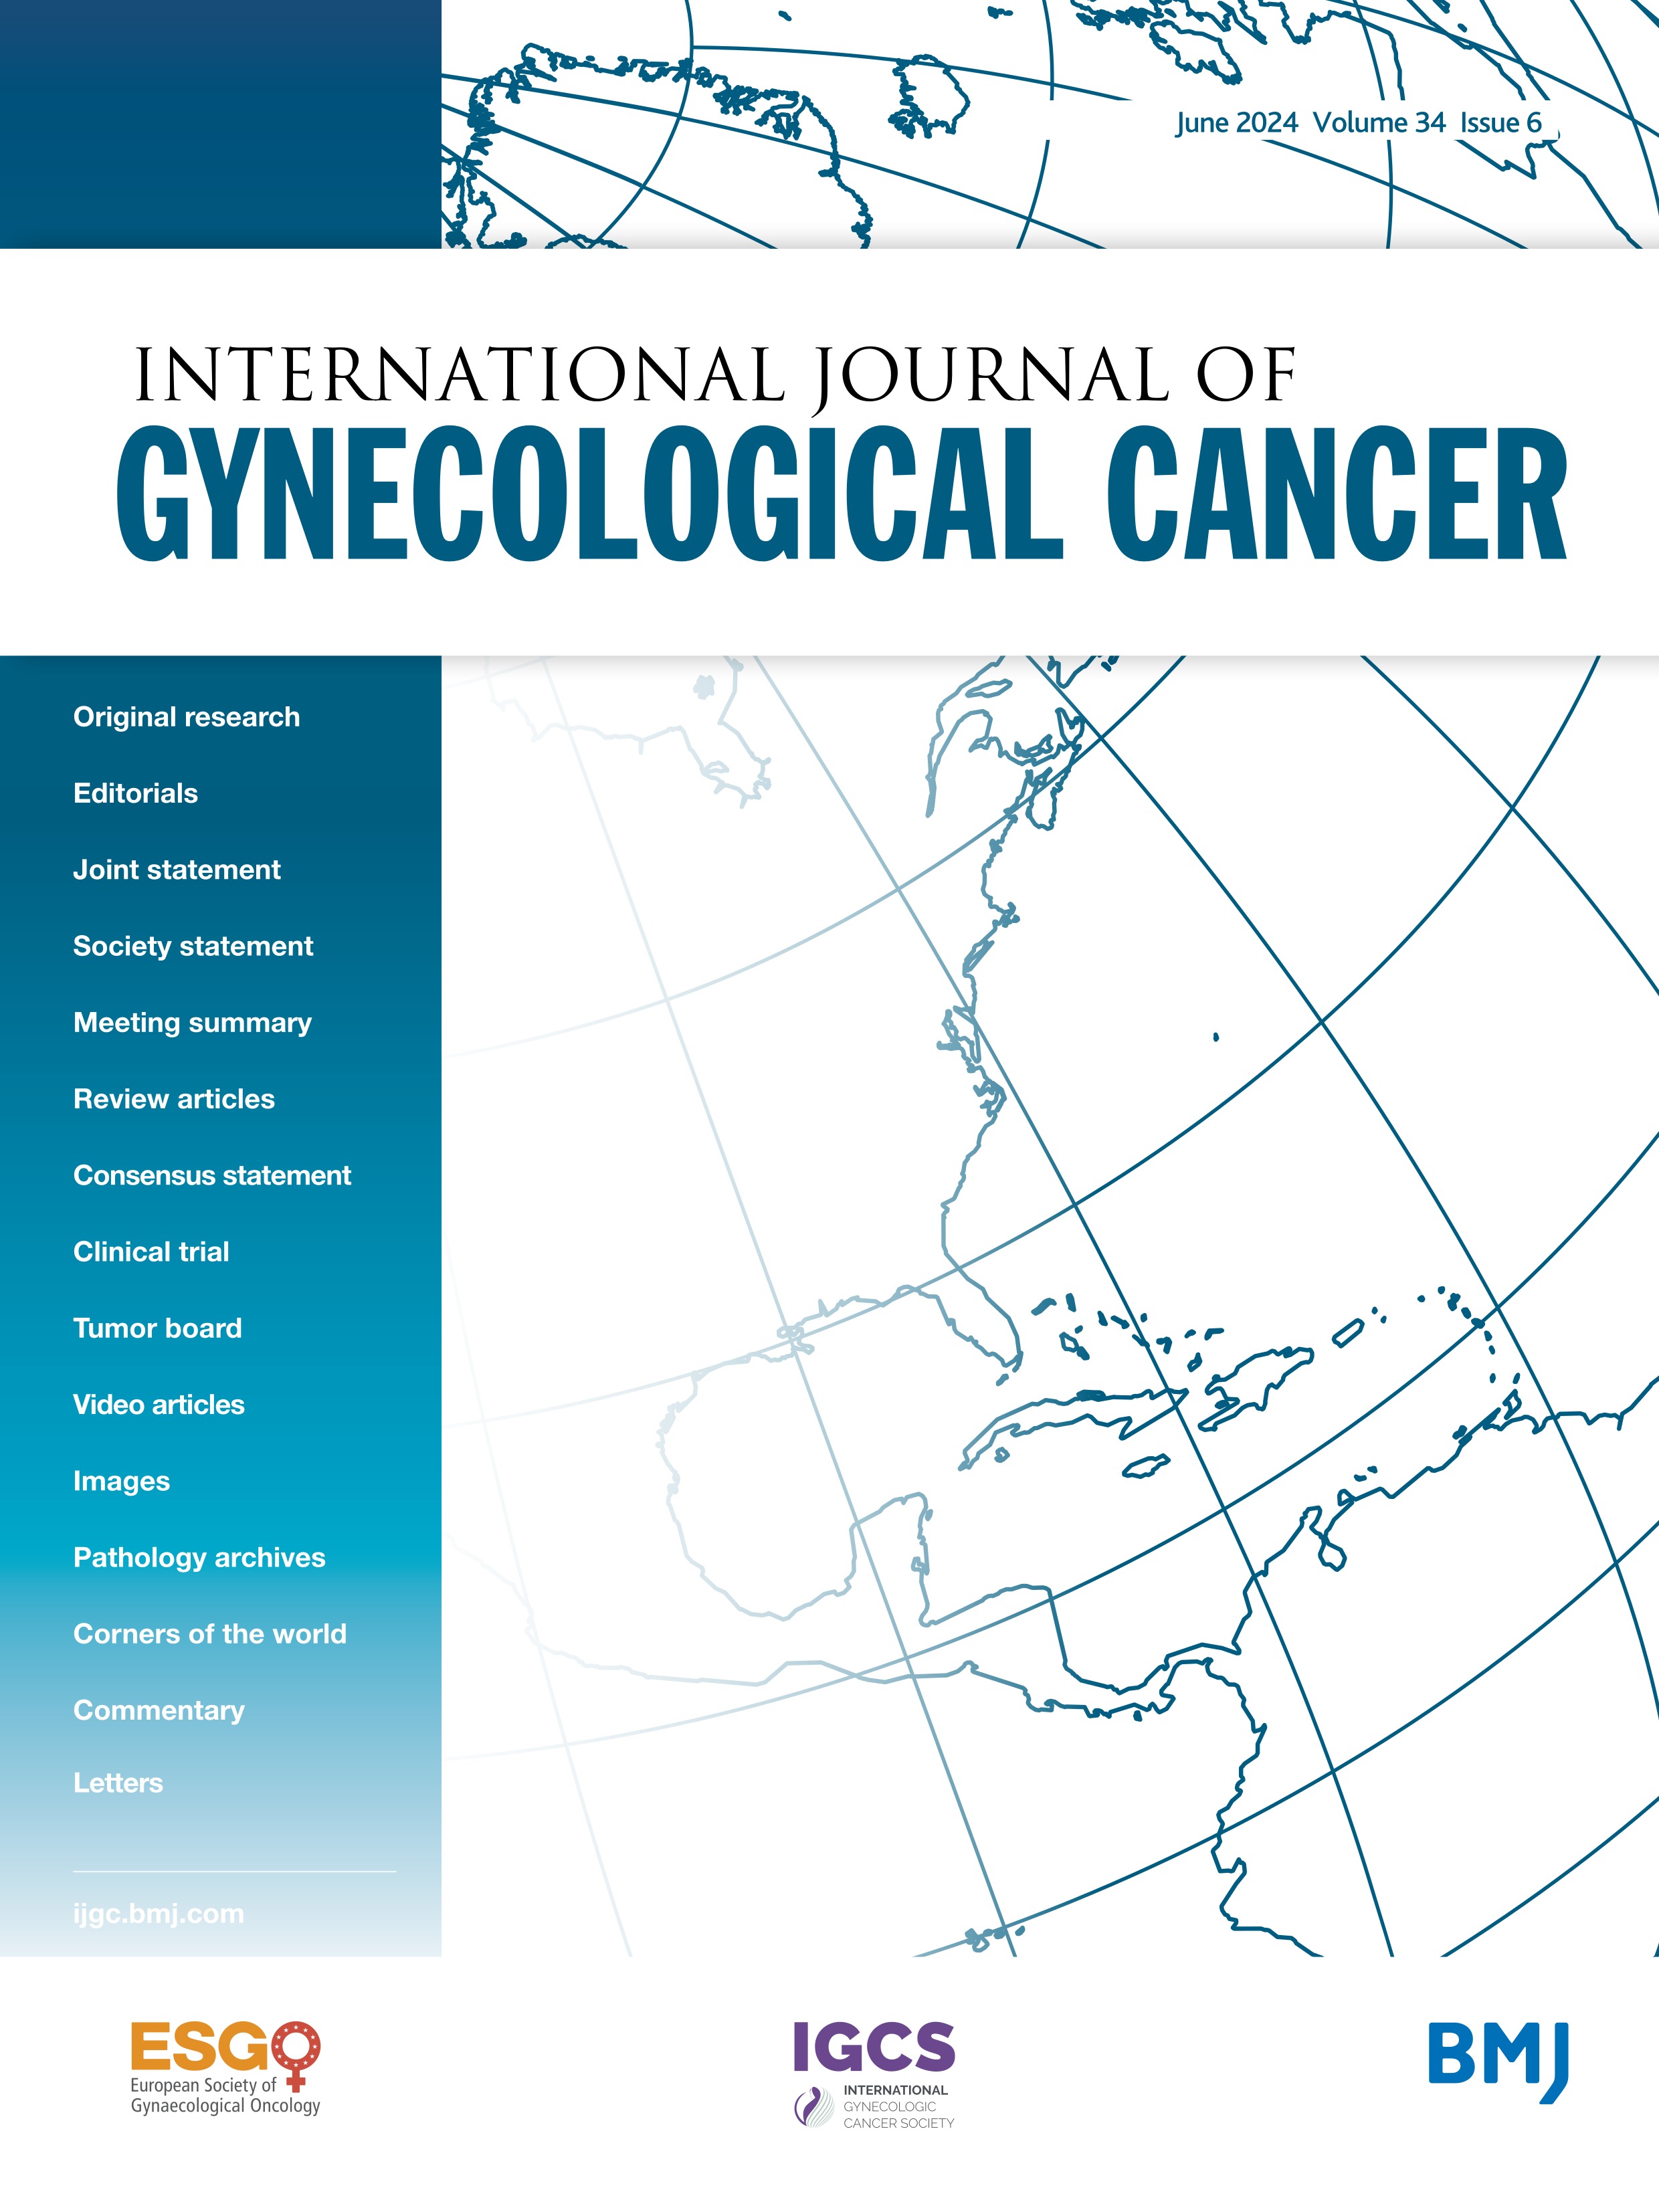 Primary cytoreductive surgery compared with neoadjuvant chemotherapy in patients with BRCA mutated advanced high grade serous ovarian cancer: 10 year survival analysis